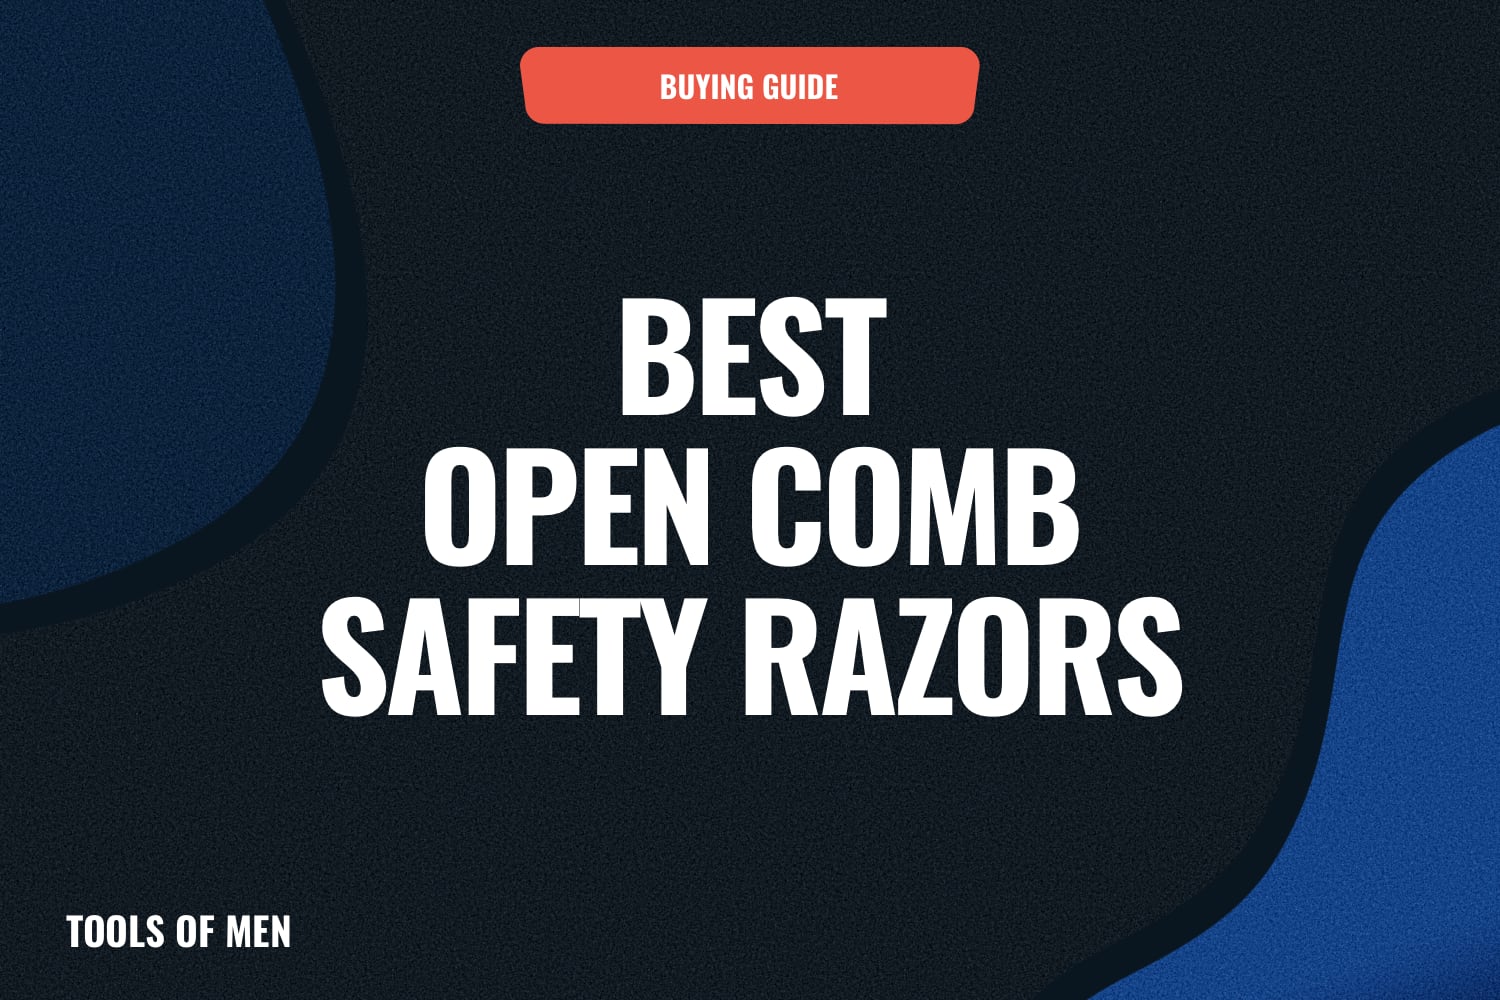 Best open comb safety razors feature image